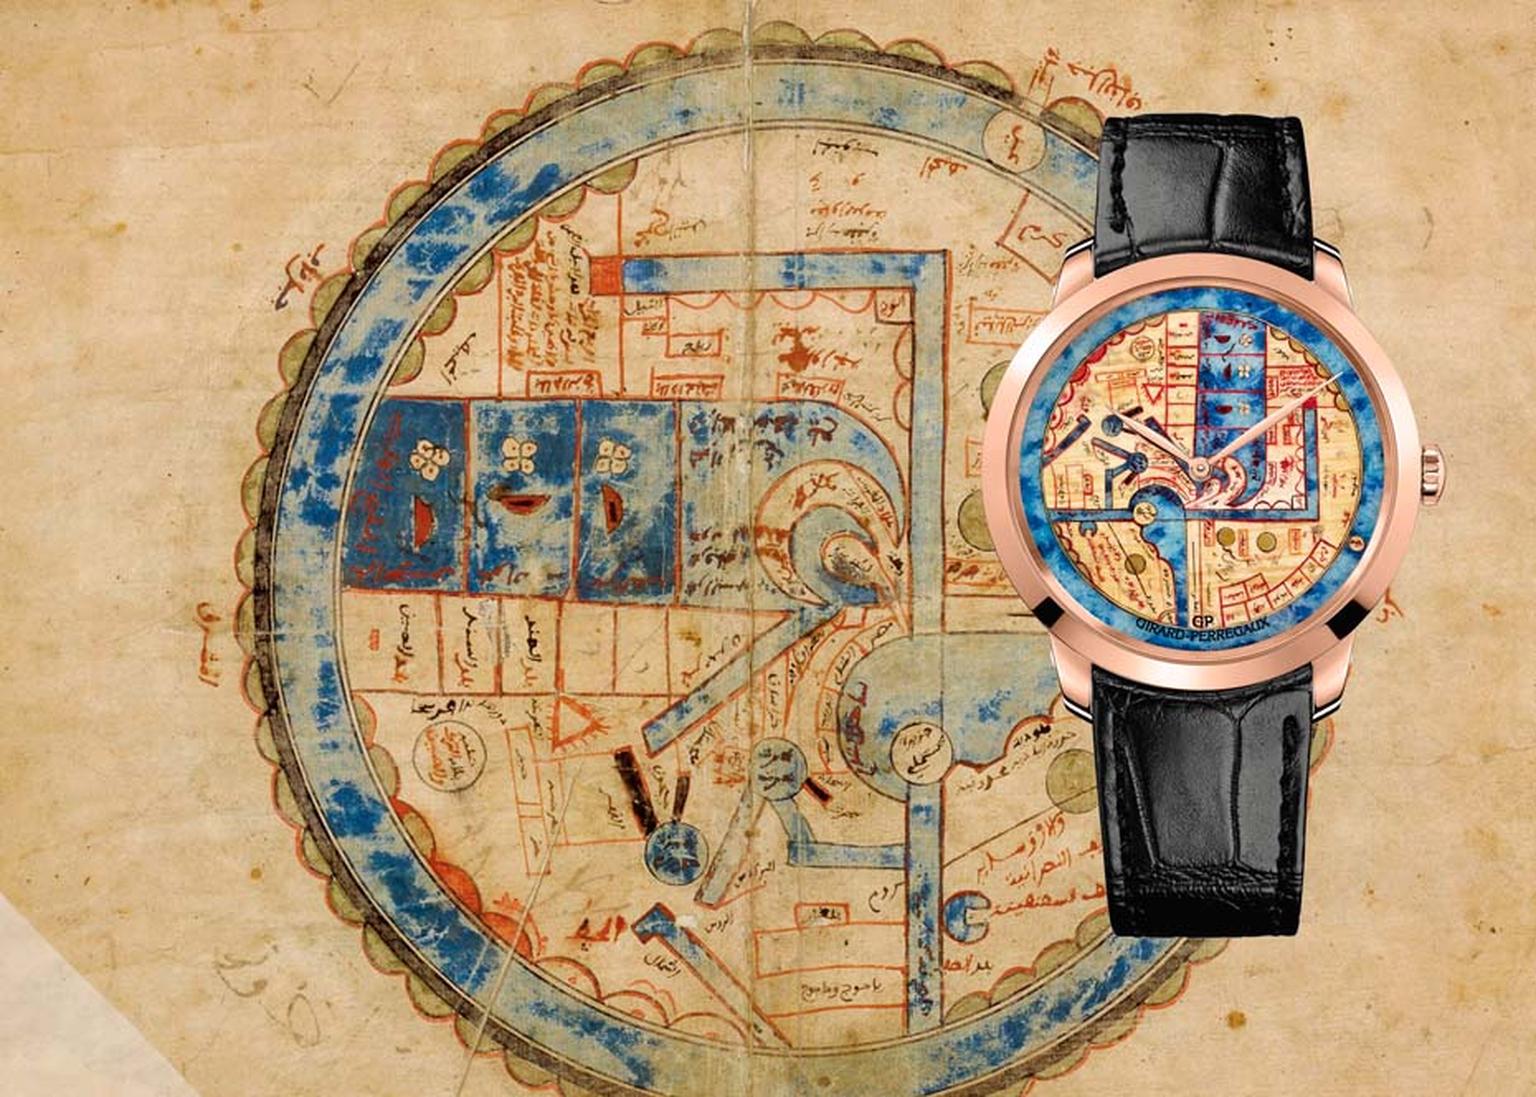 The Pearl of Wonders watch, one of the three new watches in Girard-Perregaux's new Chambers of Wonders collection, is drawn from the cartographic work of the 15th century historian Ibn al-Wardi.